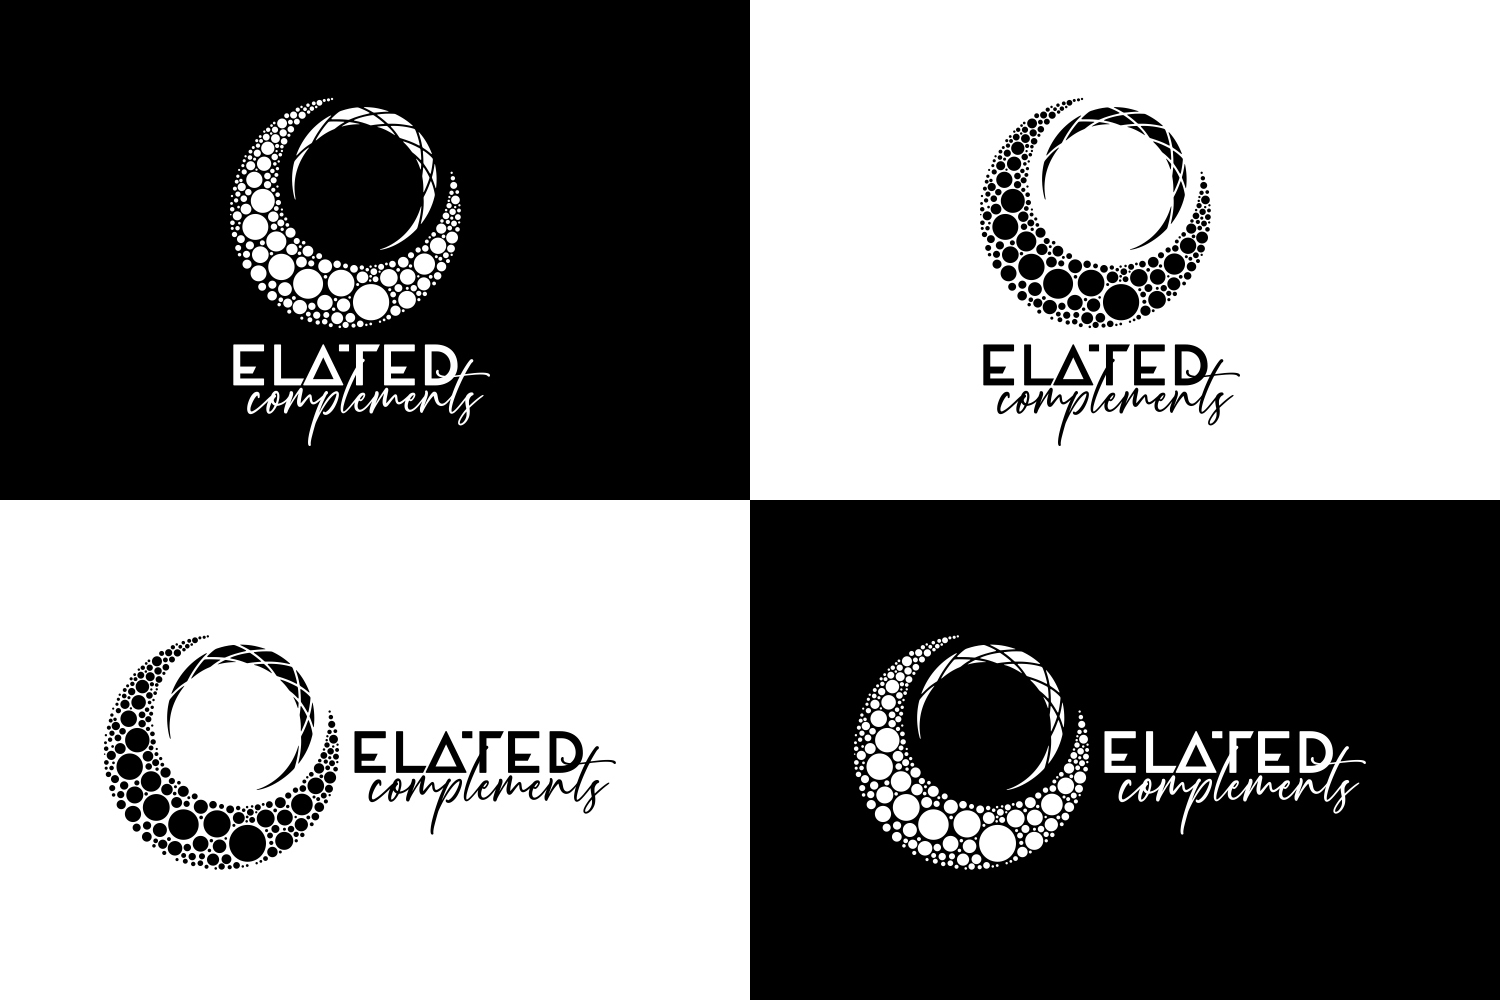 ELATED complements logo monochromatic options